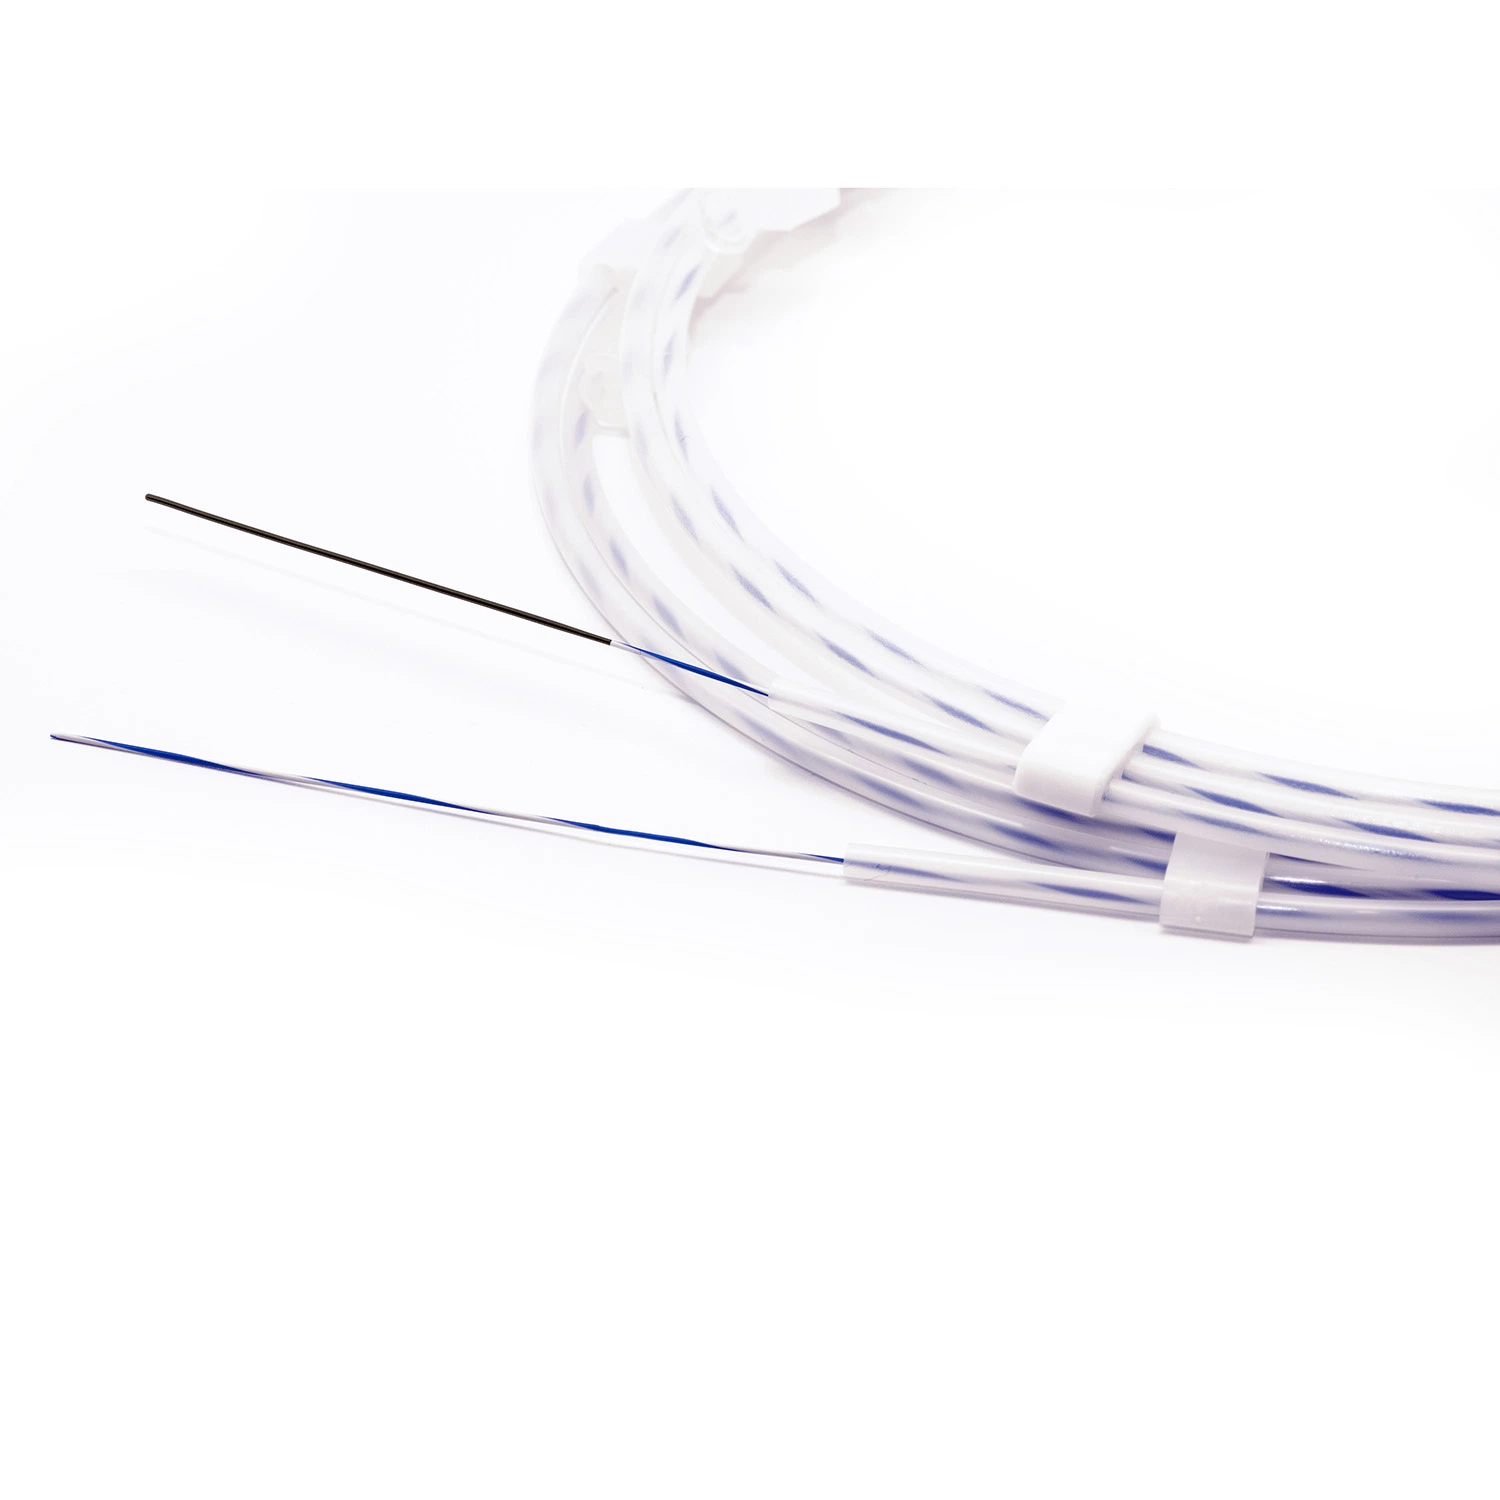 Surgical Instrument Urological Zebra Guidewire Hydrophilic Coated Tip and PTFE Tip